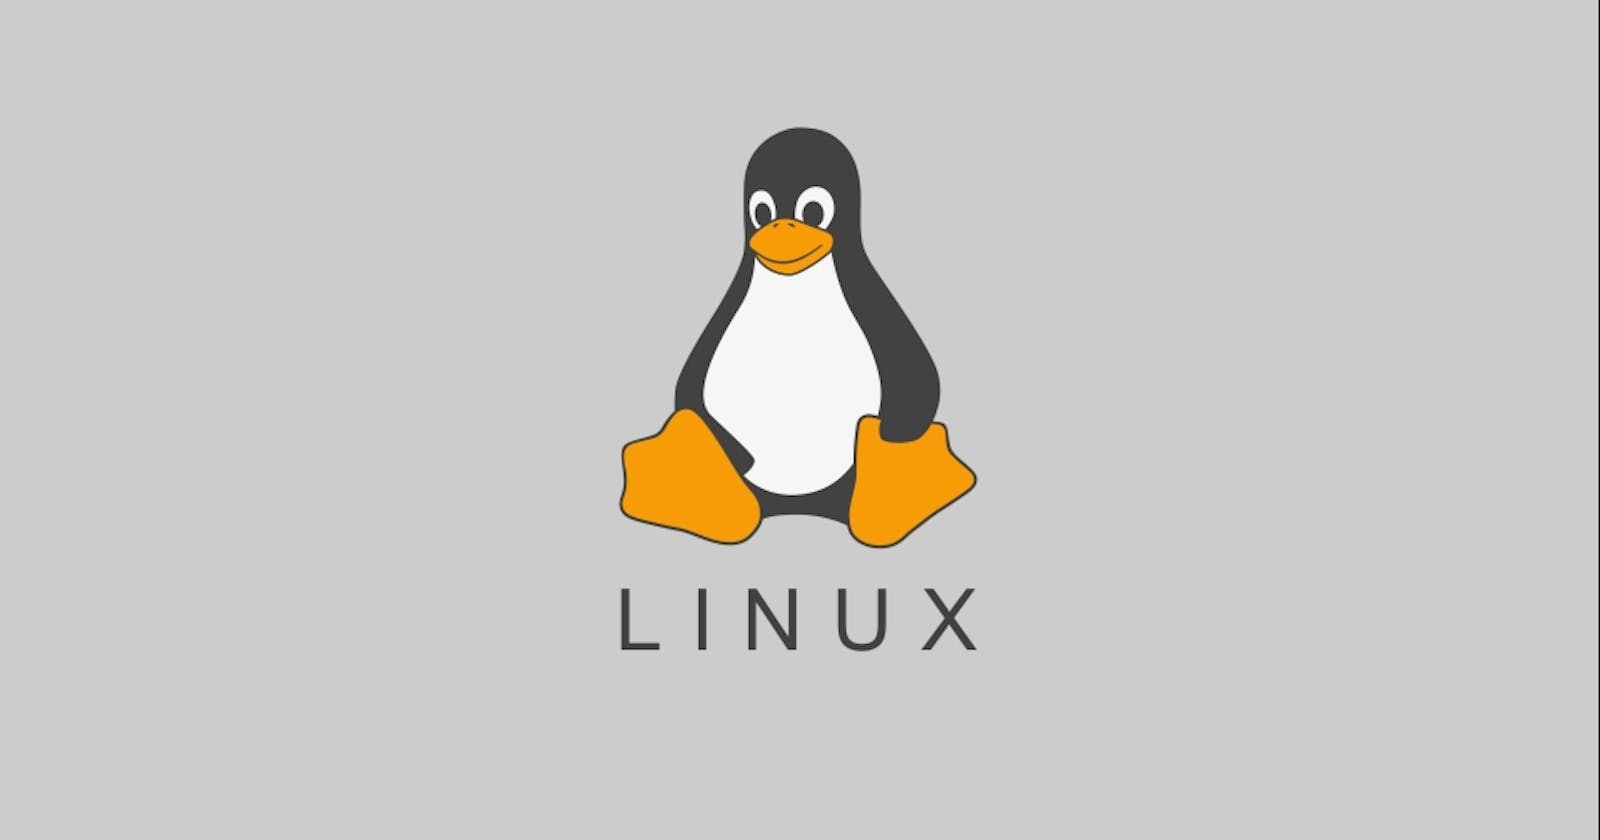 Day3: Basics of Linux (Part 2)